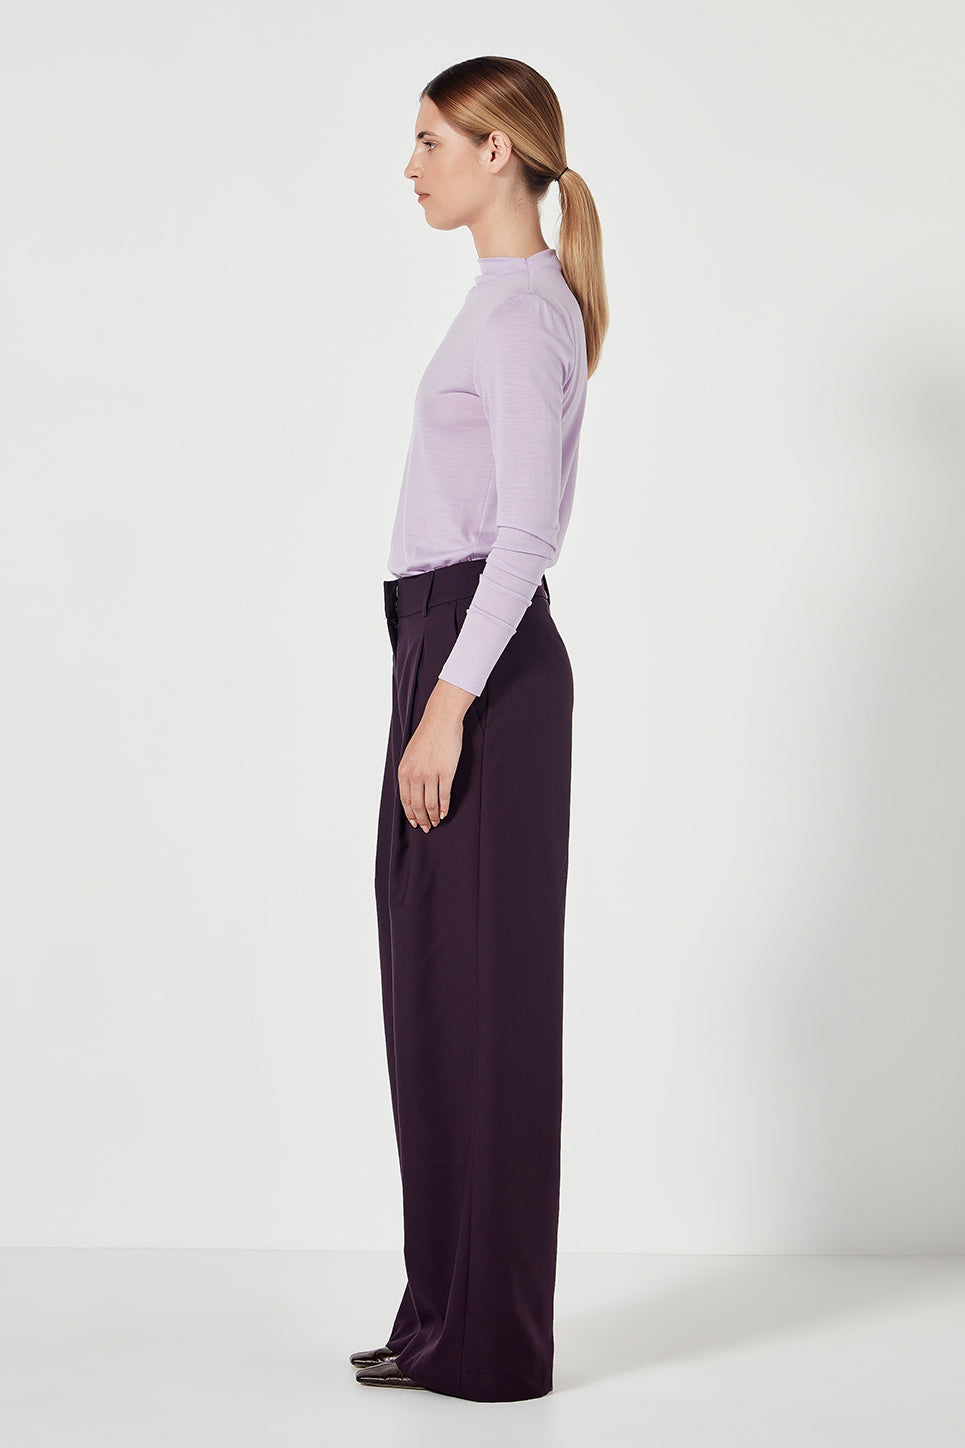 The Cezanne Top in Lilac